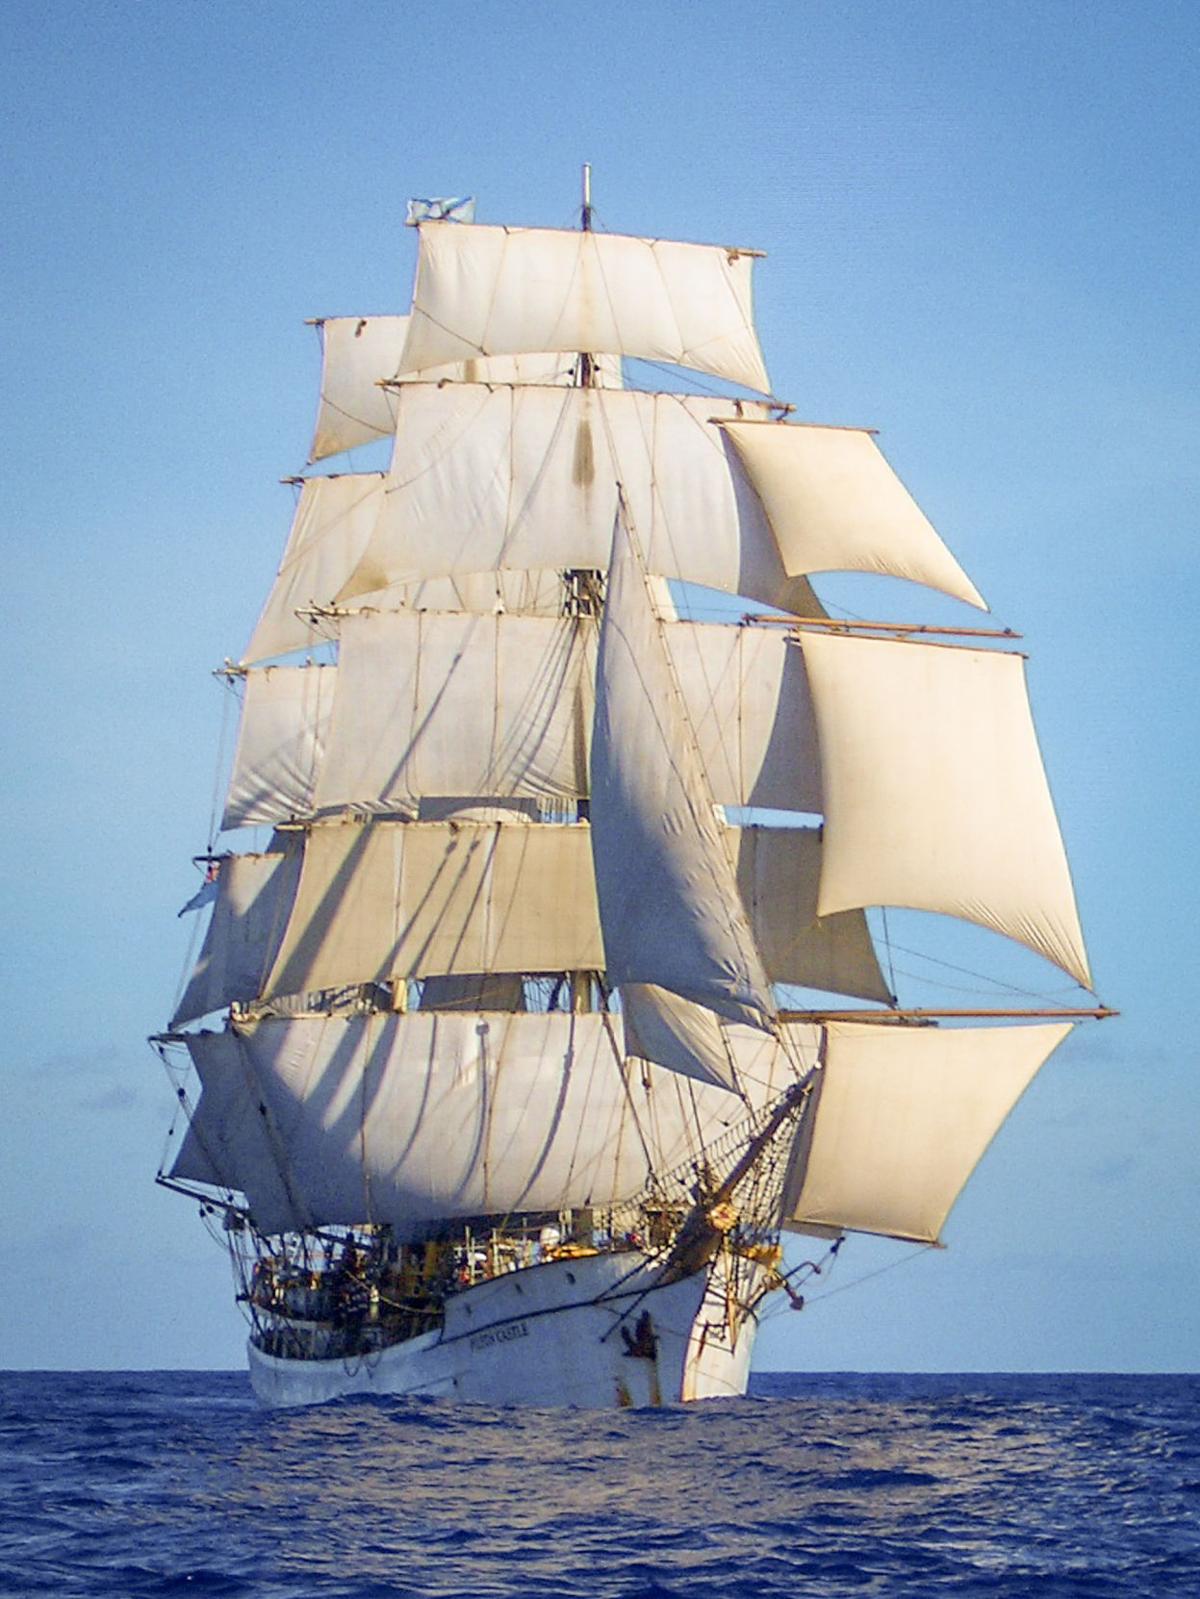 Sail Portsmouth festival to feature Eagle, 3 tall ships 